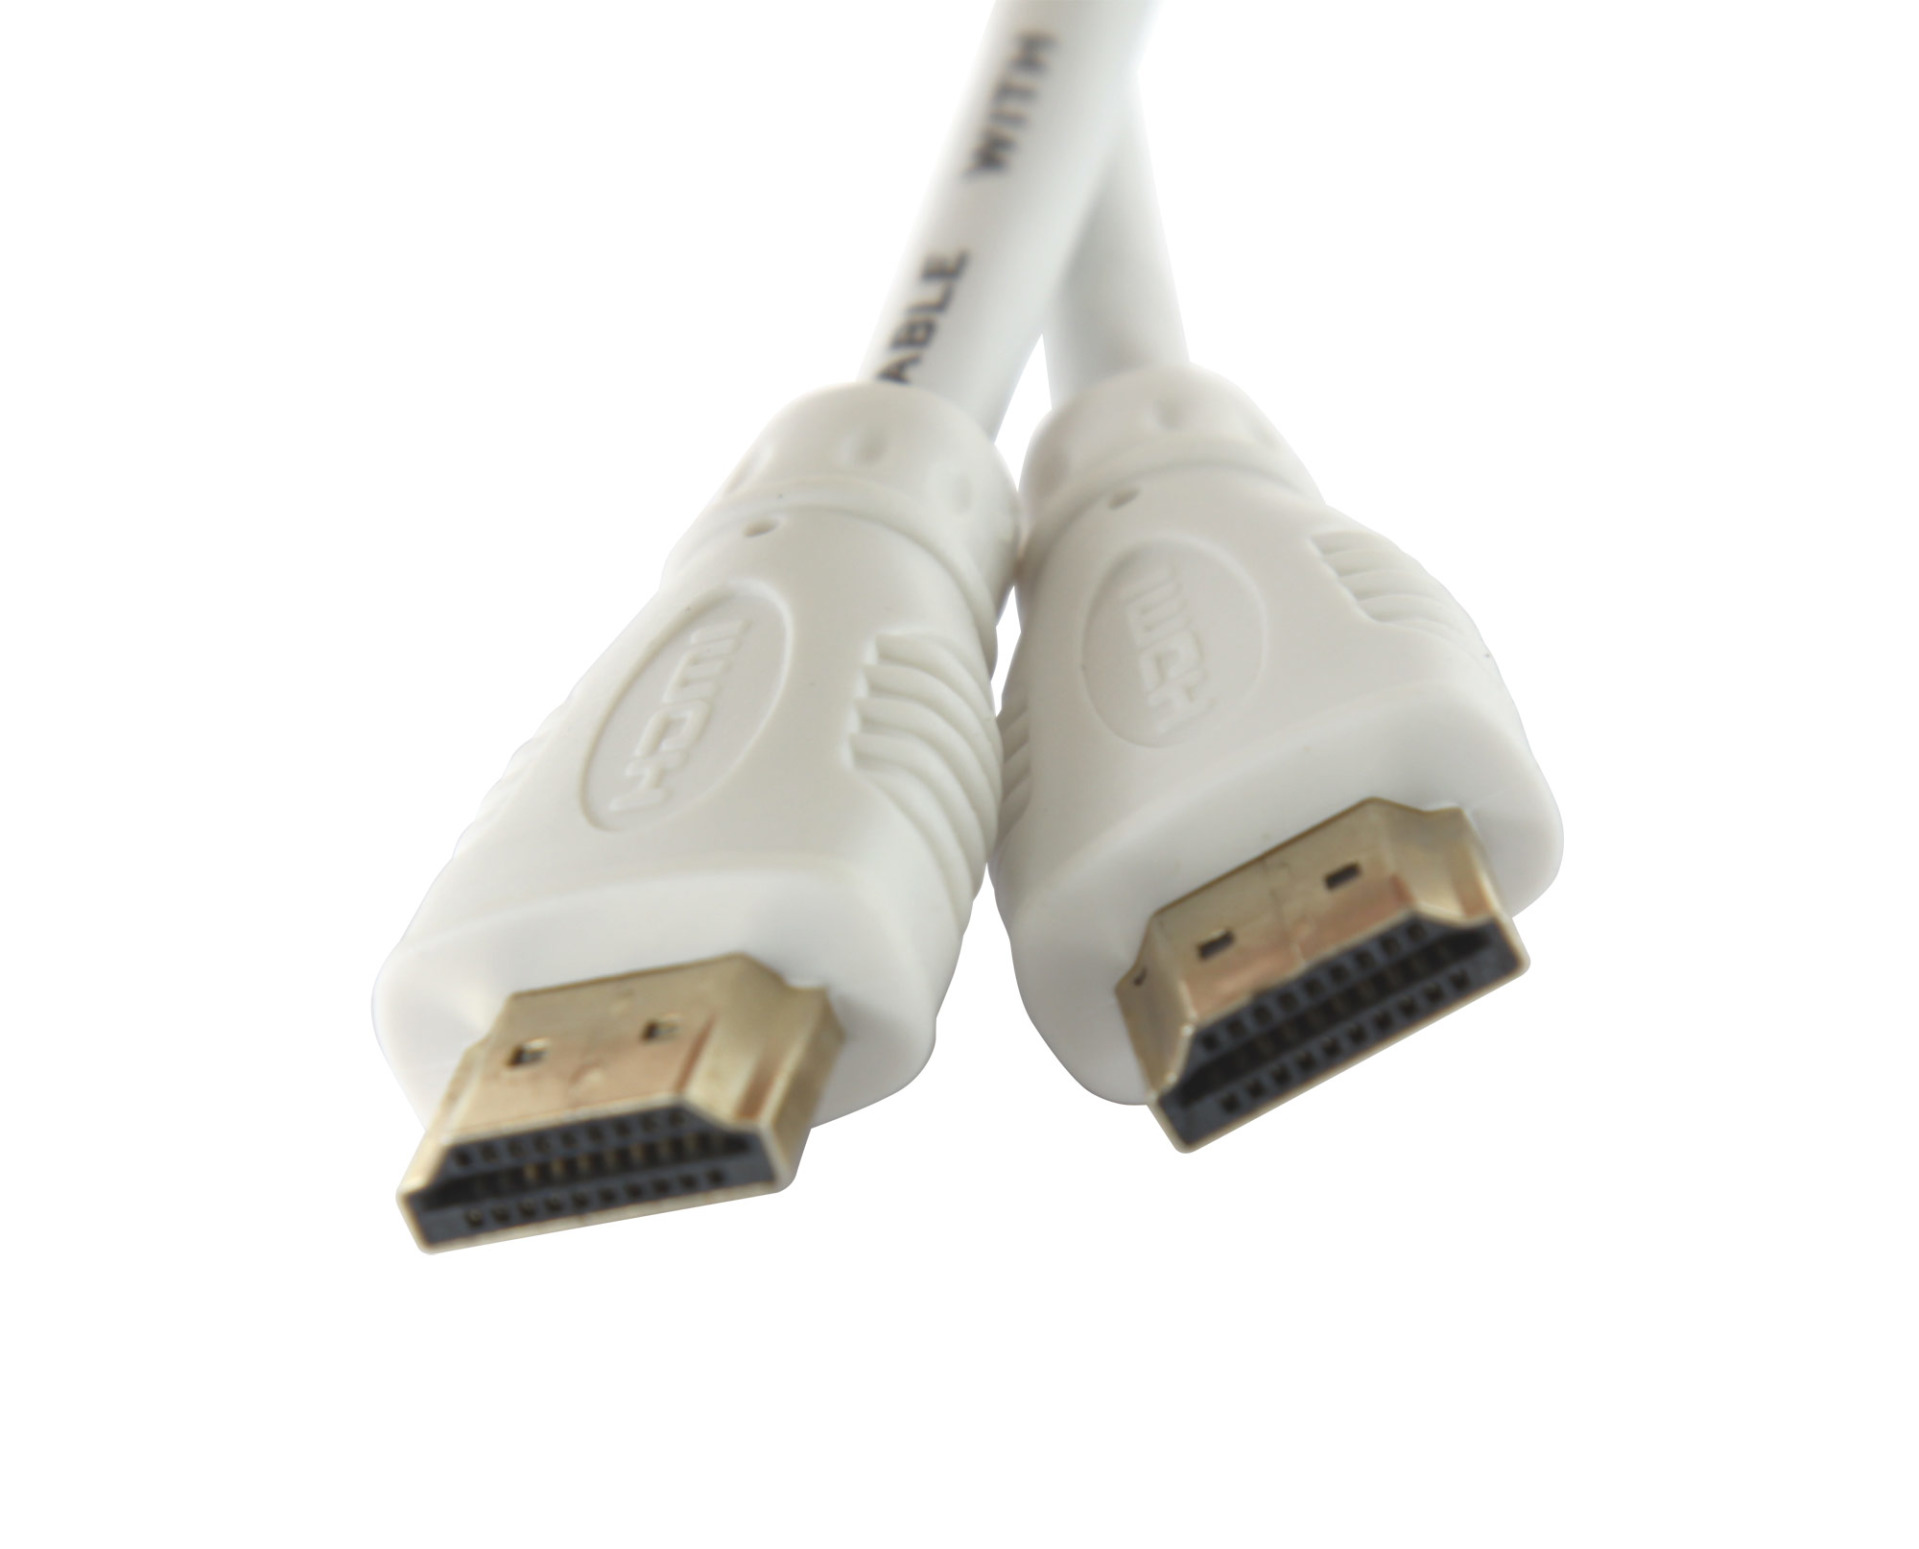 High Speed HDMI Cable with Ethernet, white, 3m